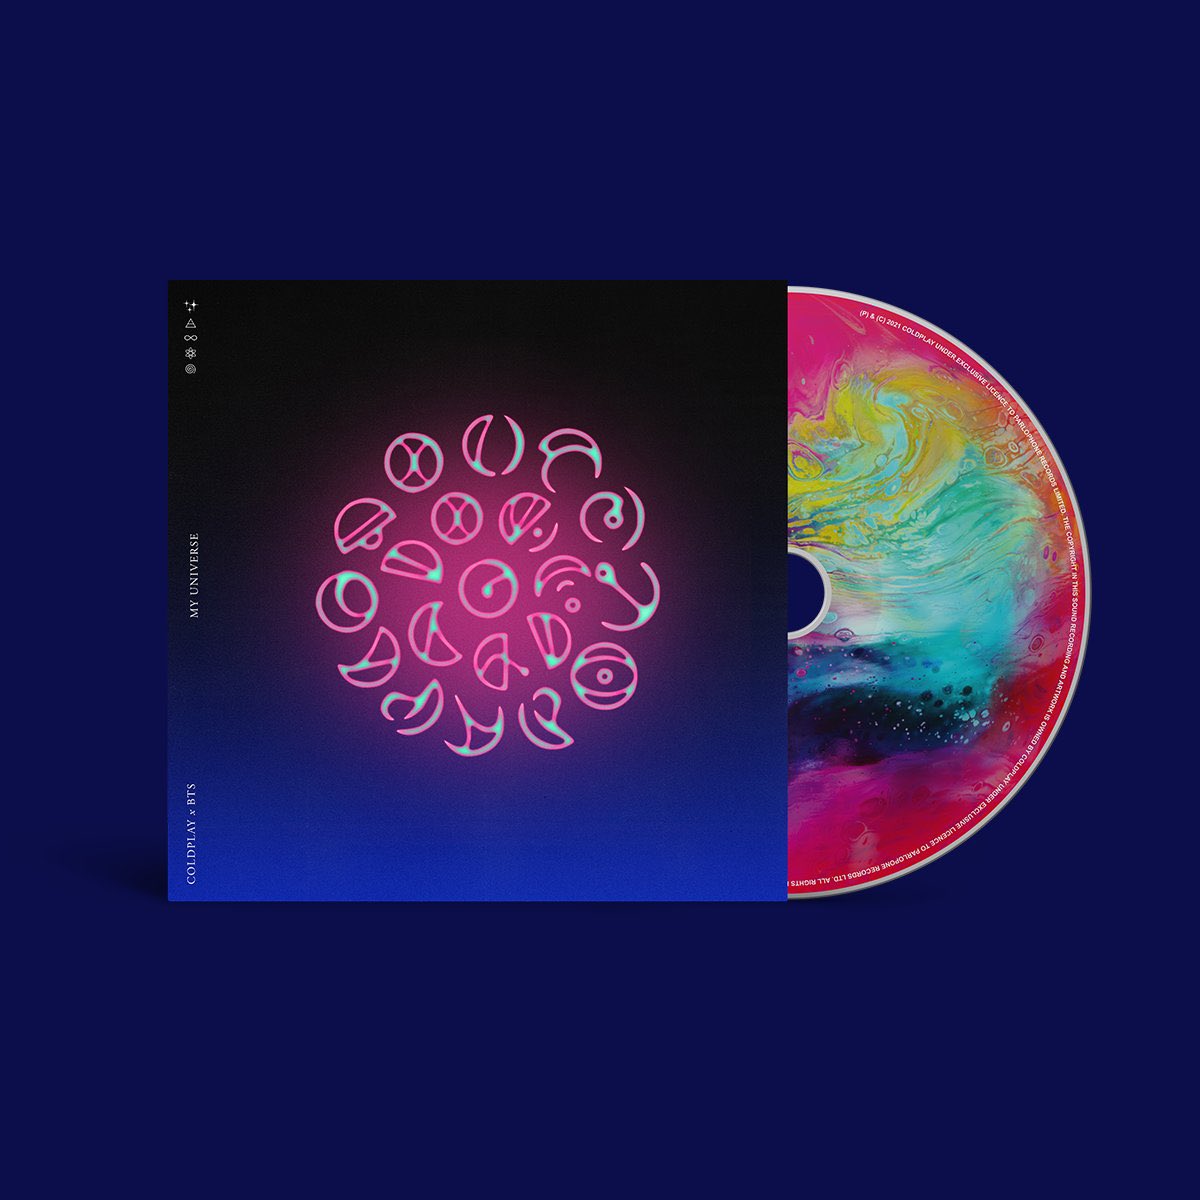 ColdplayXtra on Twitter: "The limited edition CD's for Coldplay x BTS's new  upcoming single #MyUniverse have now sold-out on all worldwide stores 💽 We  will keep a close eye on the stores